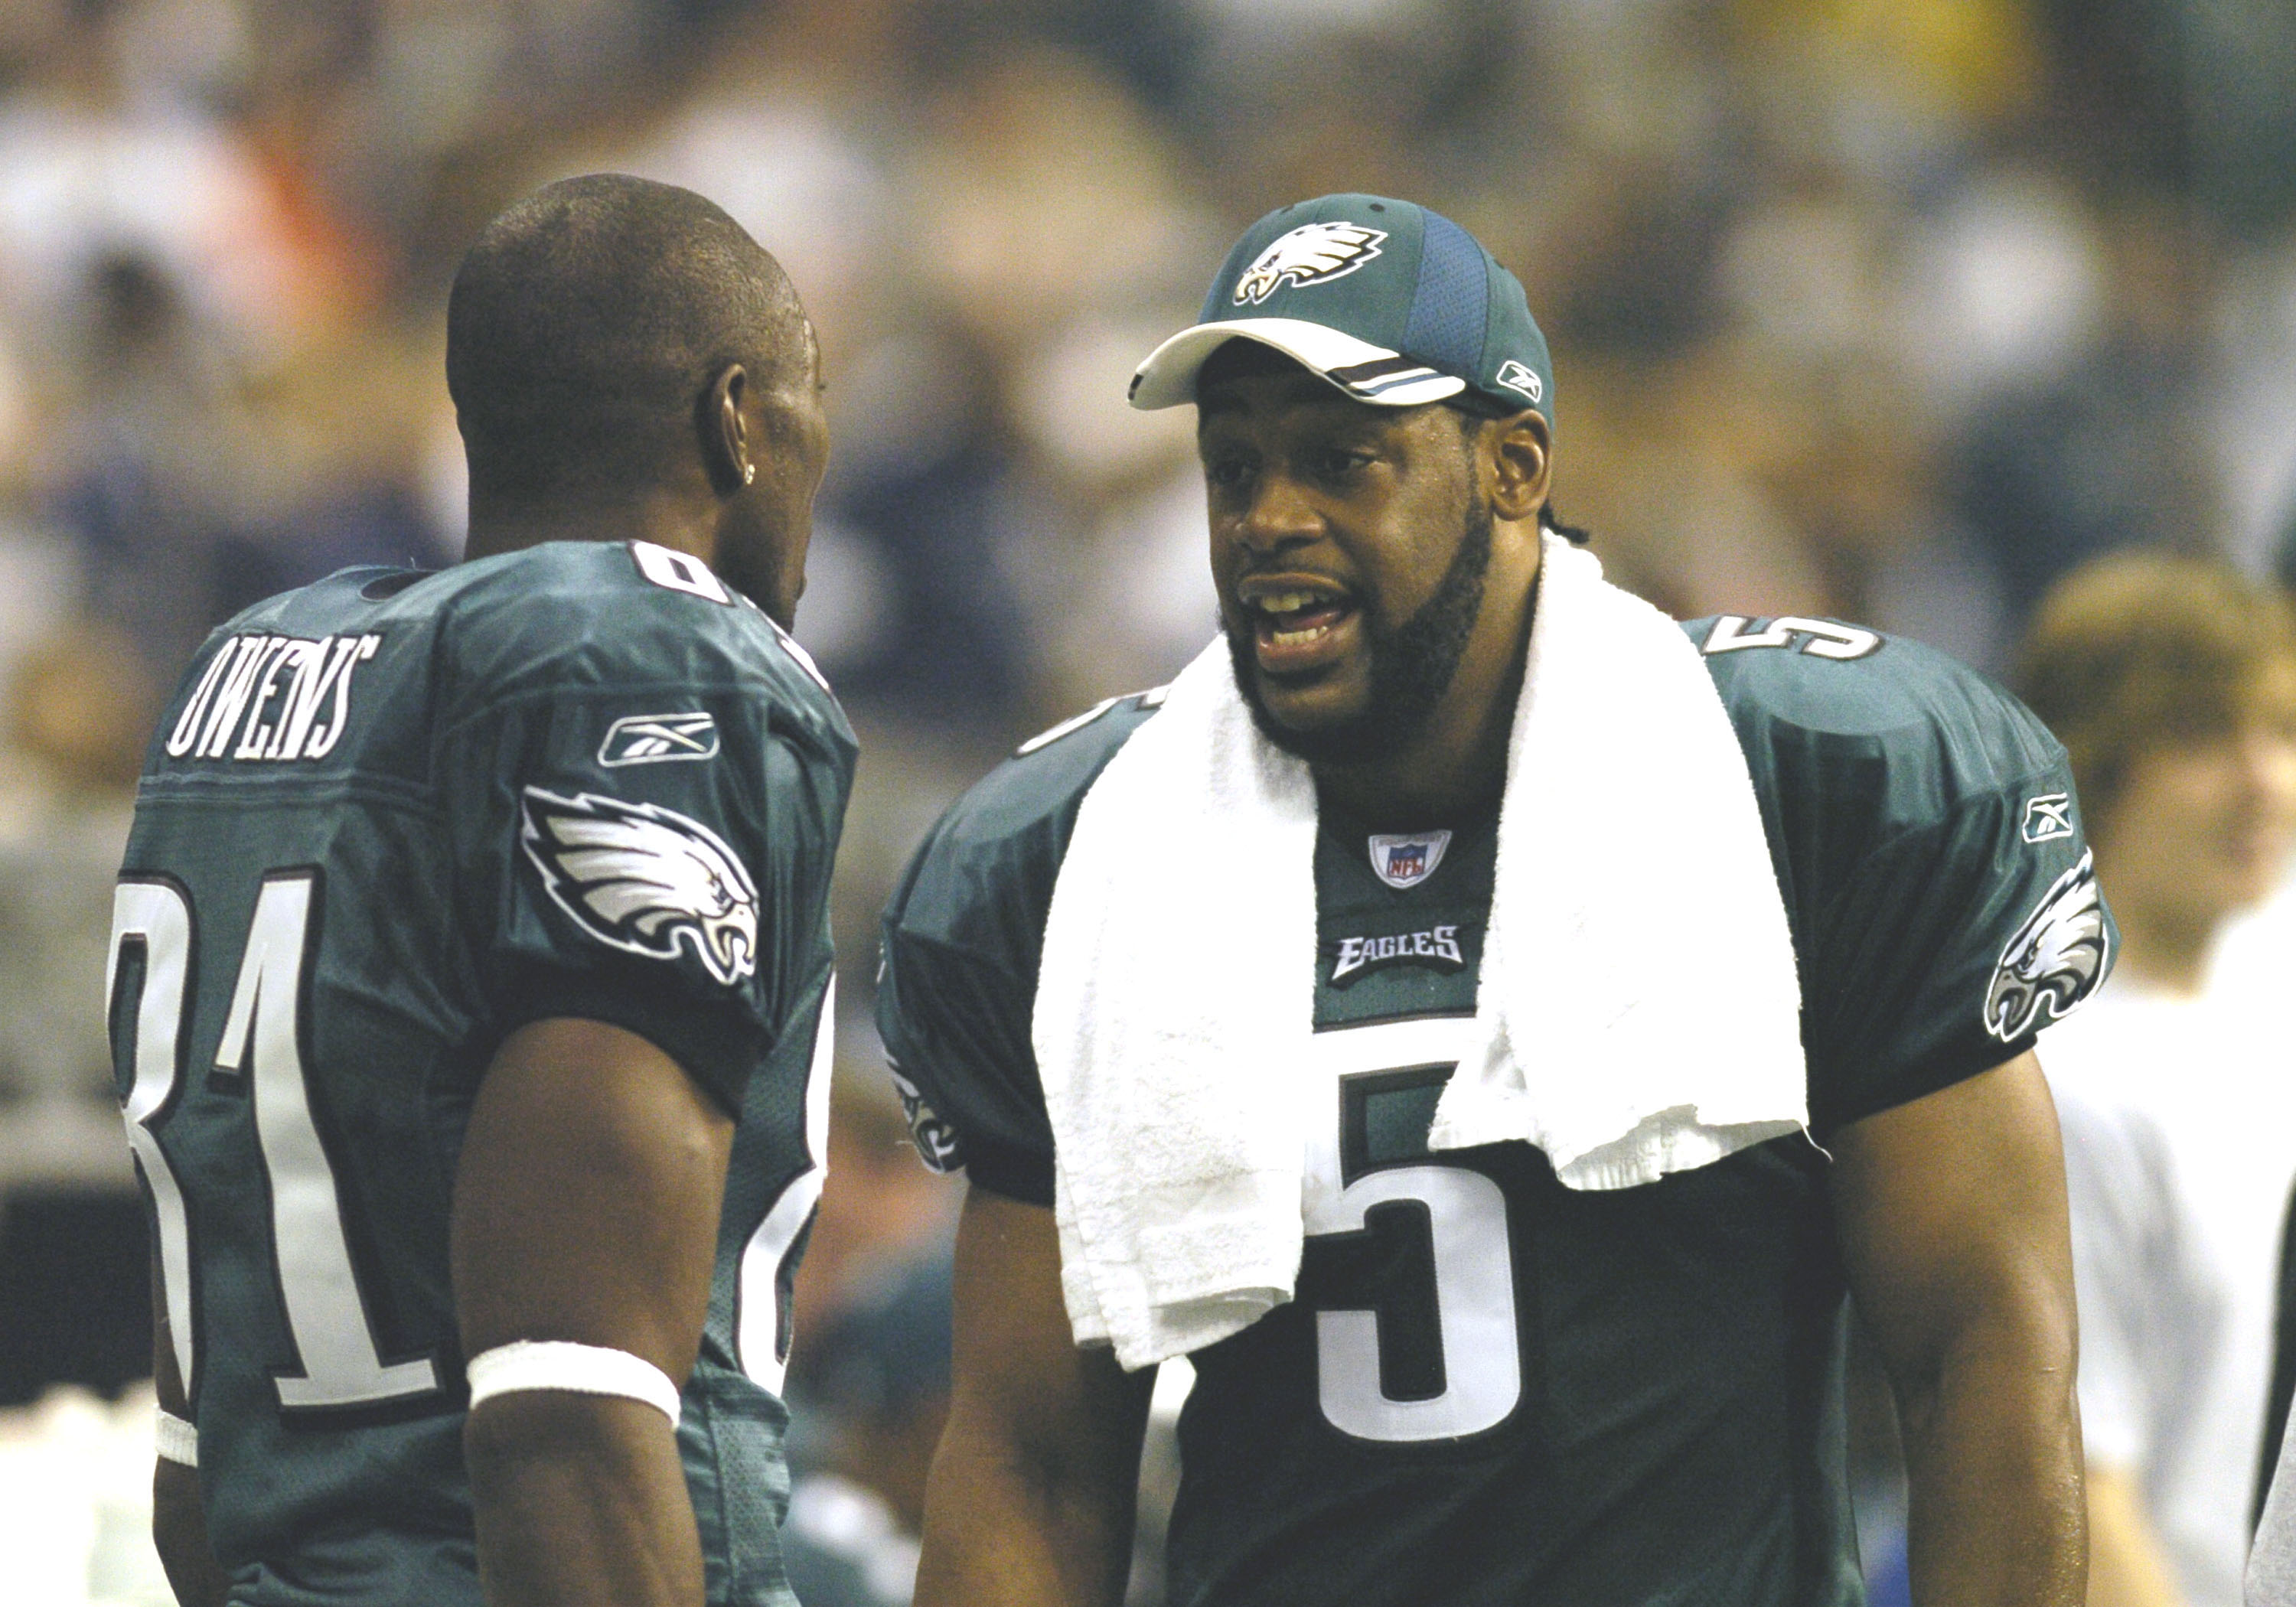 Terrell Owens and Donovan McNabb talk on the sideline of an Eagles game